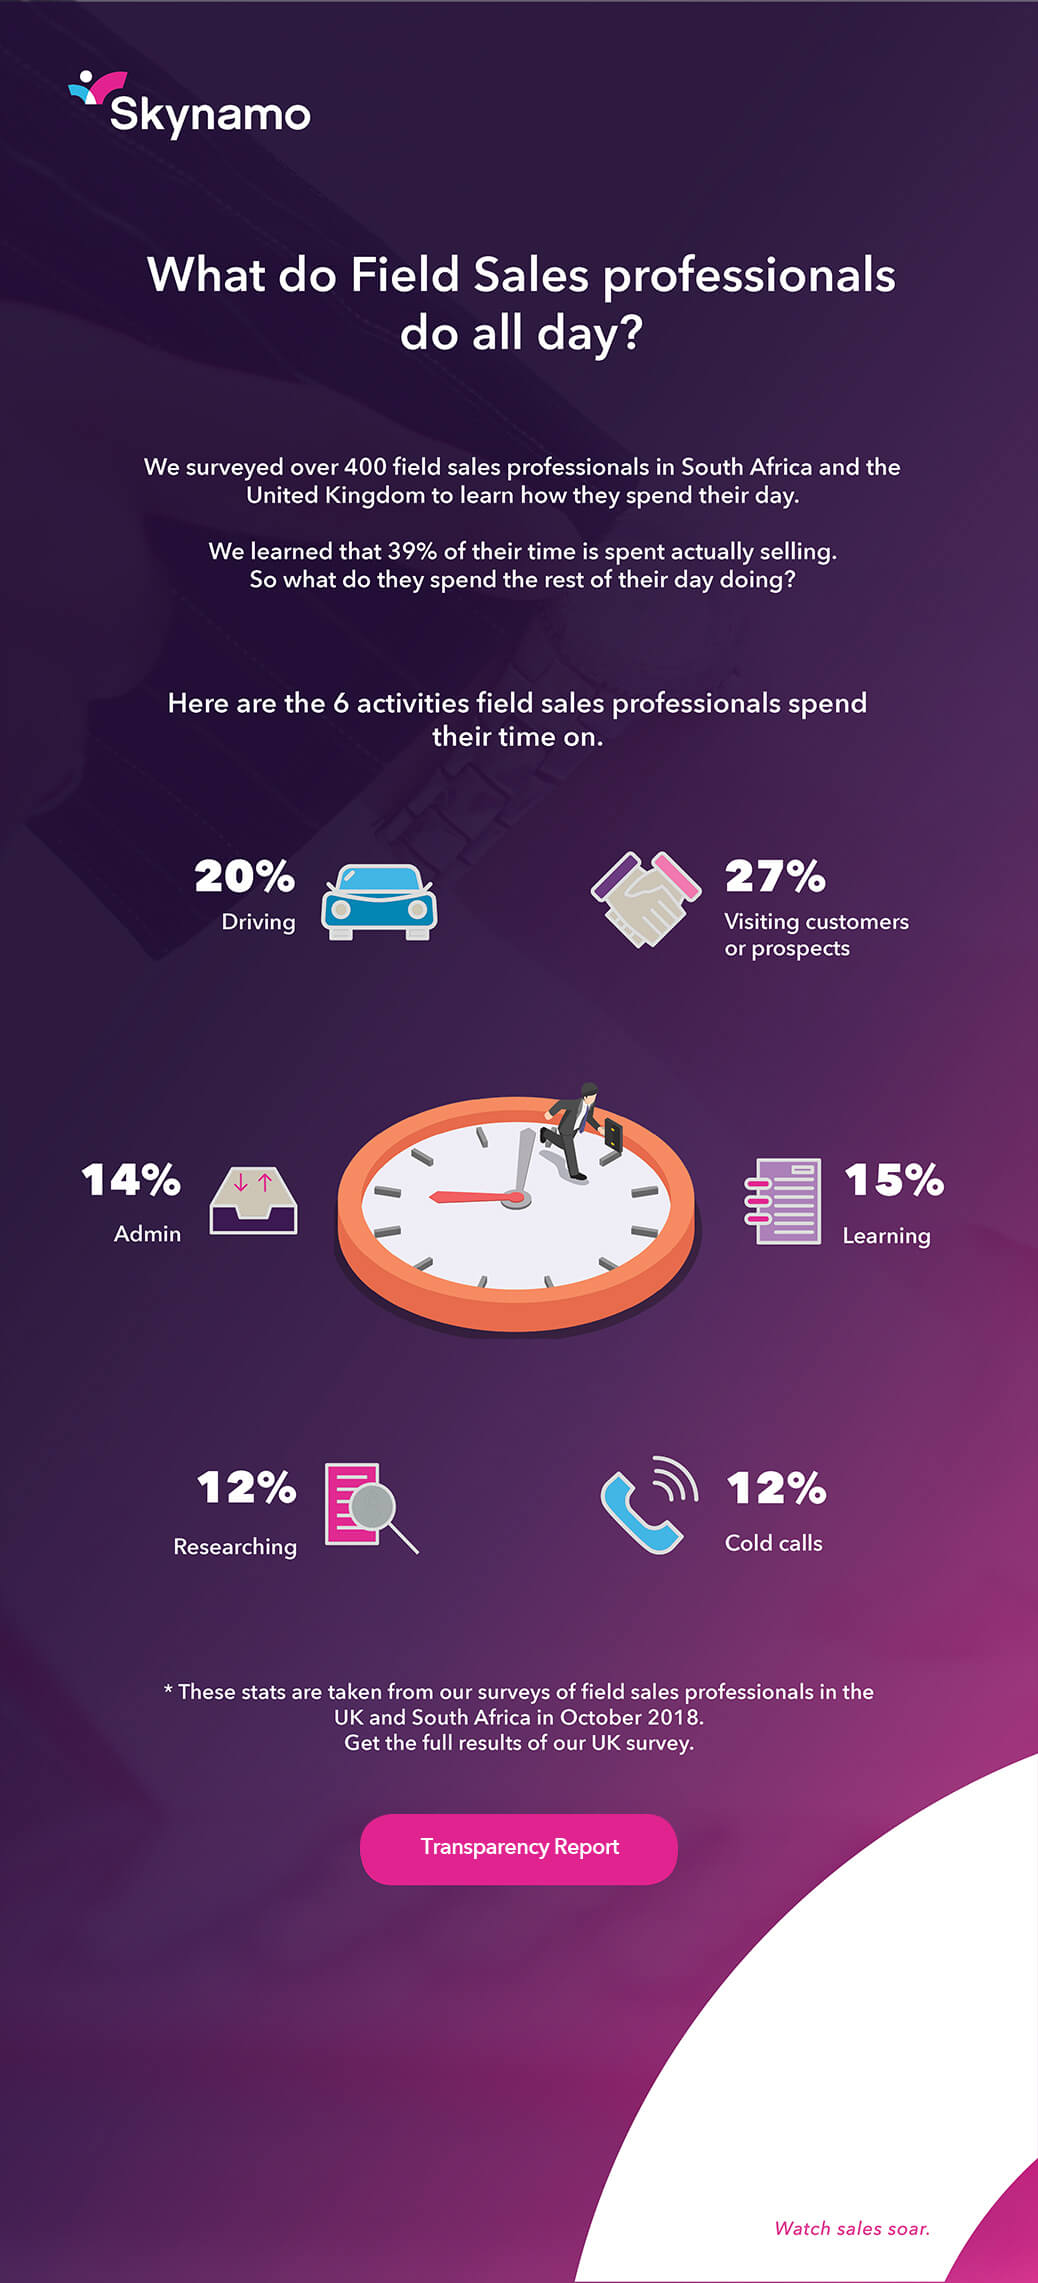 What do Field Sales professionals do all day?